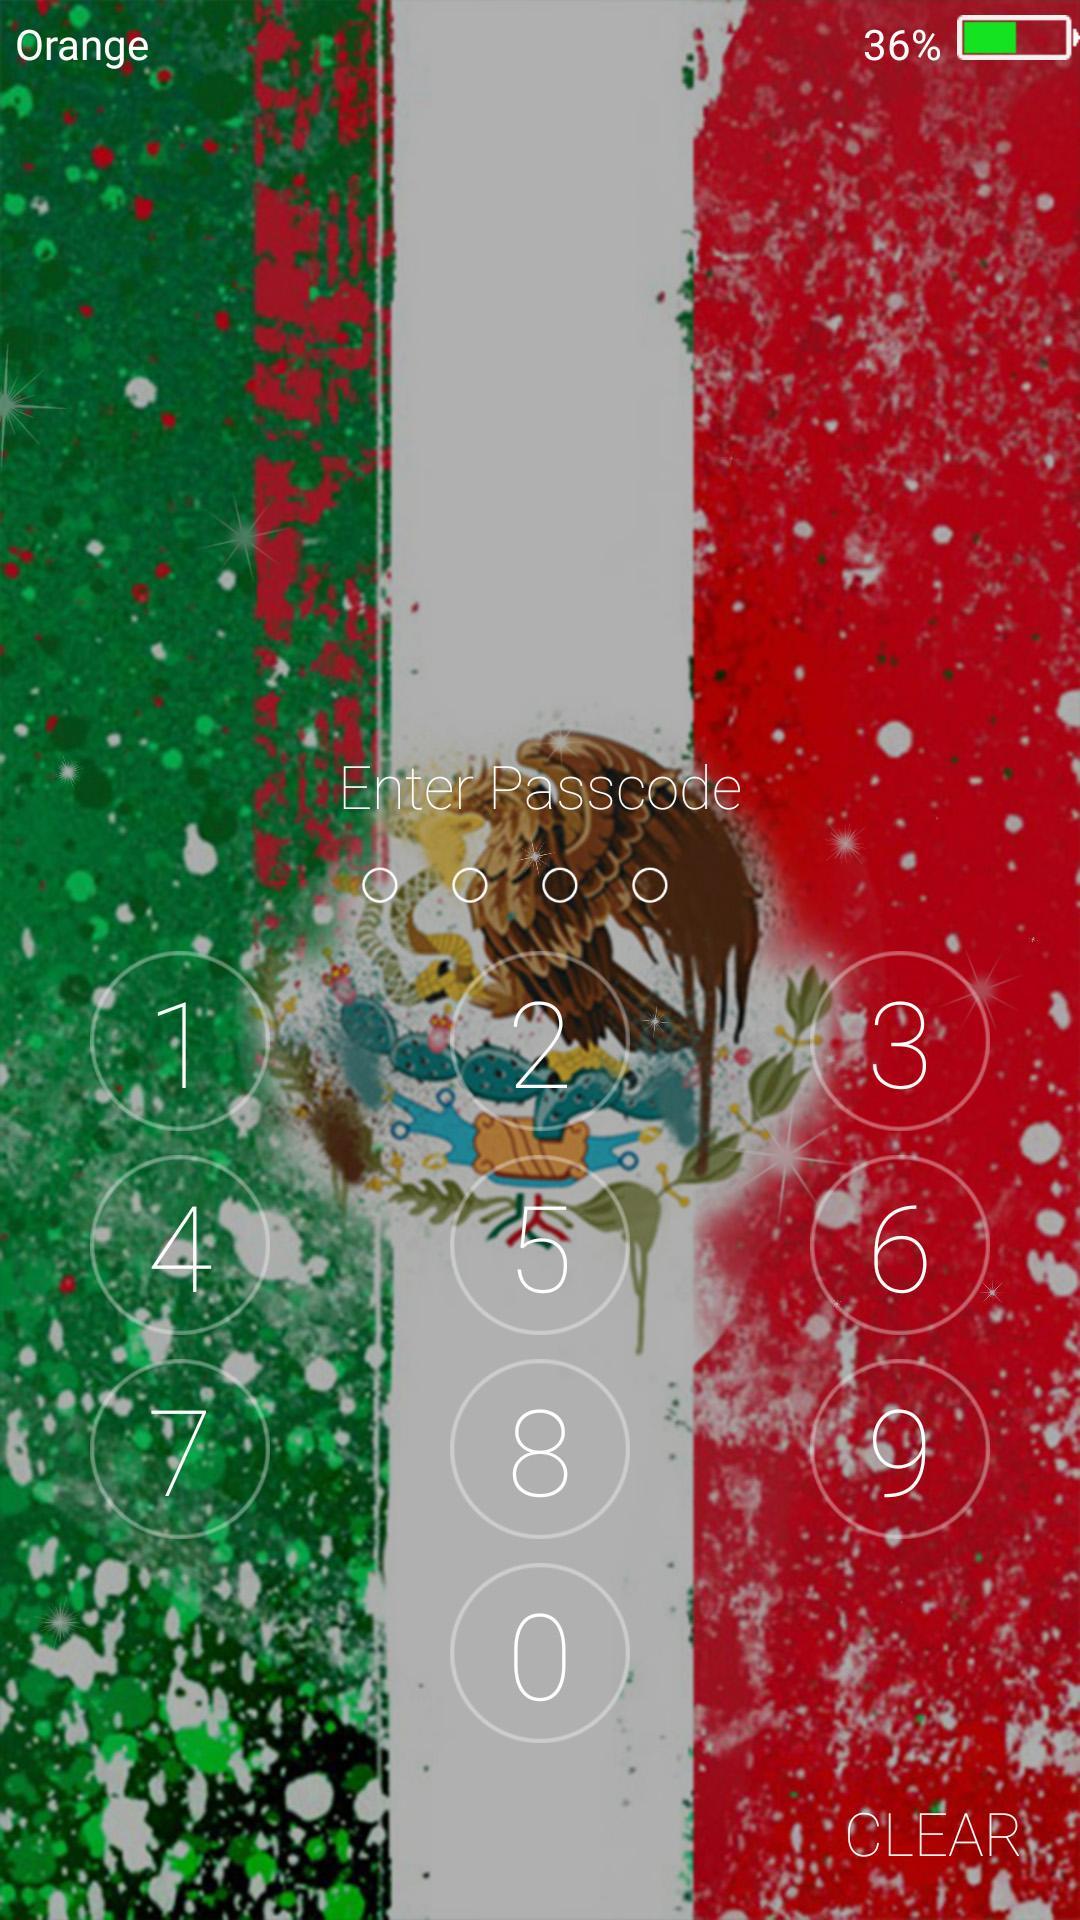 Mexico Flag Live Wallpaper Lock Screen For Android Apk Download